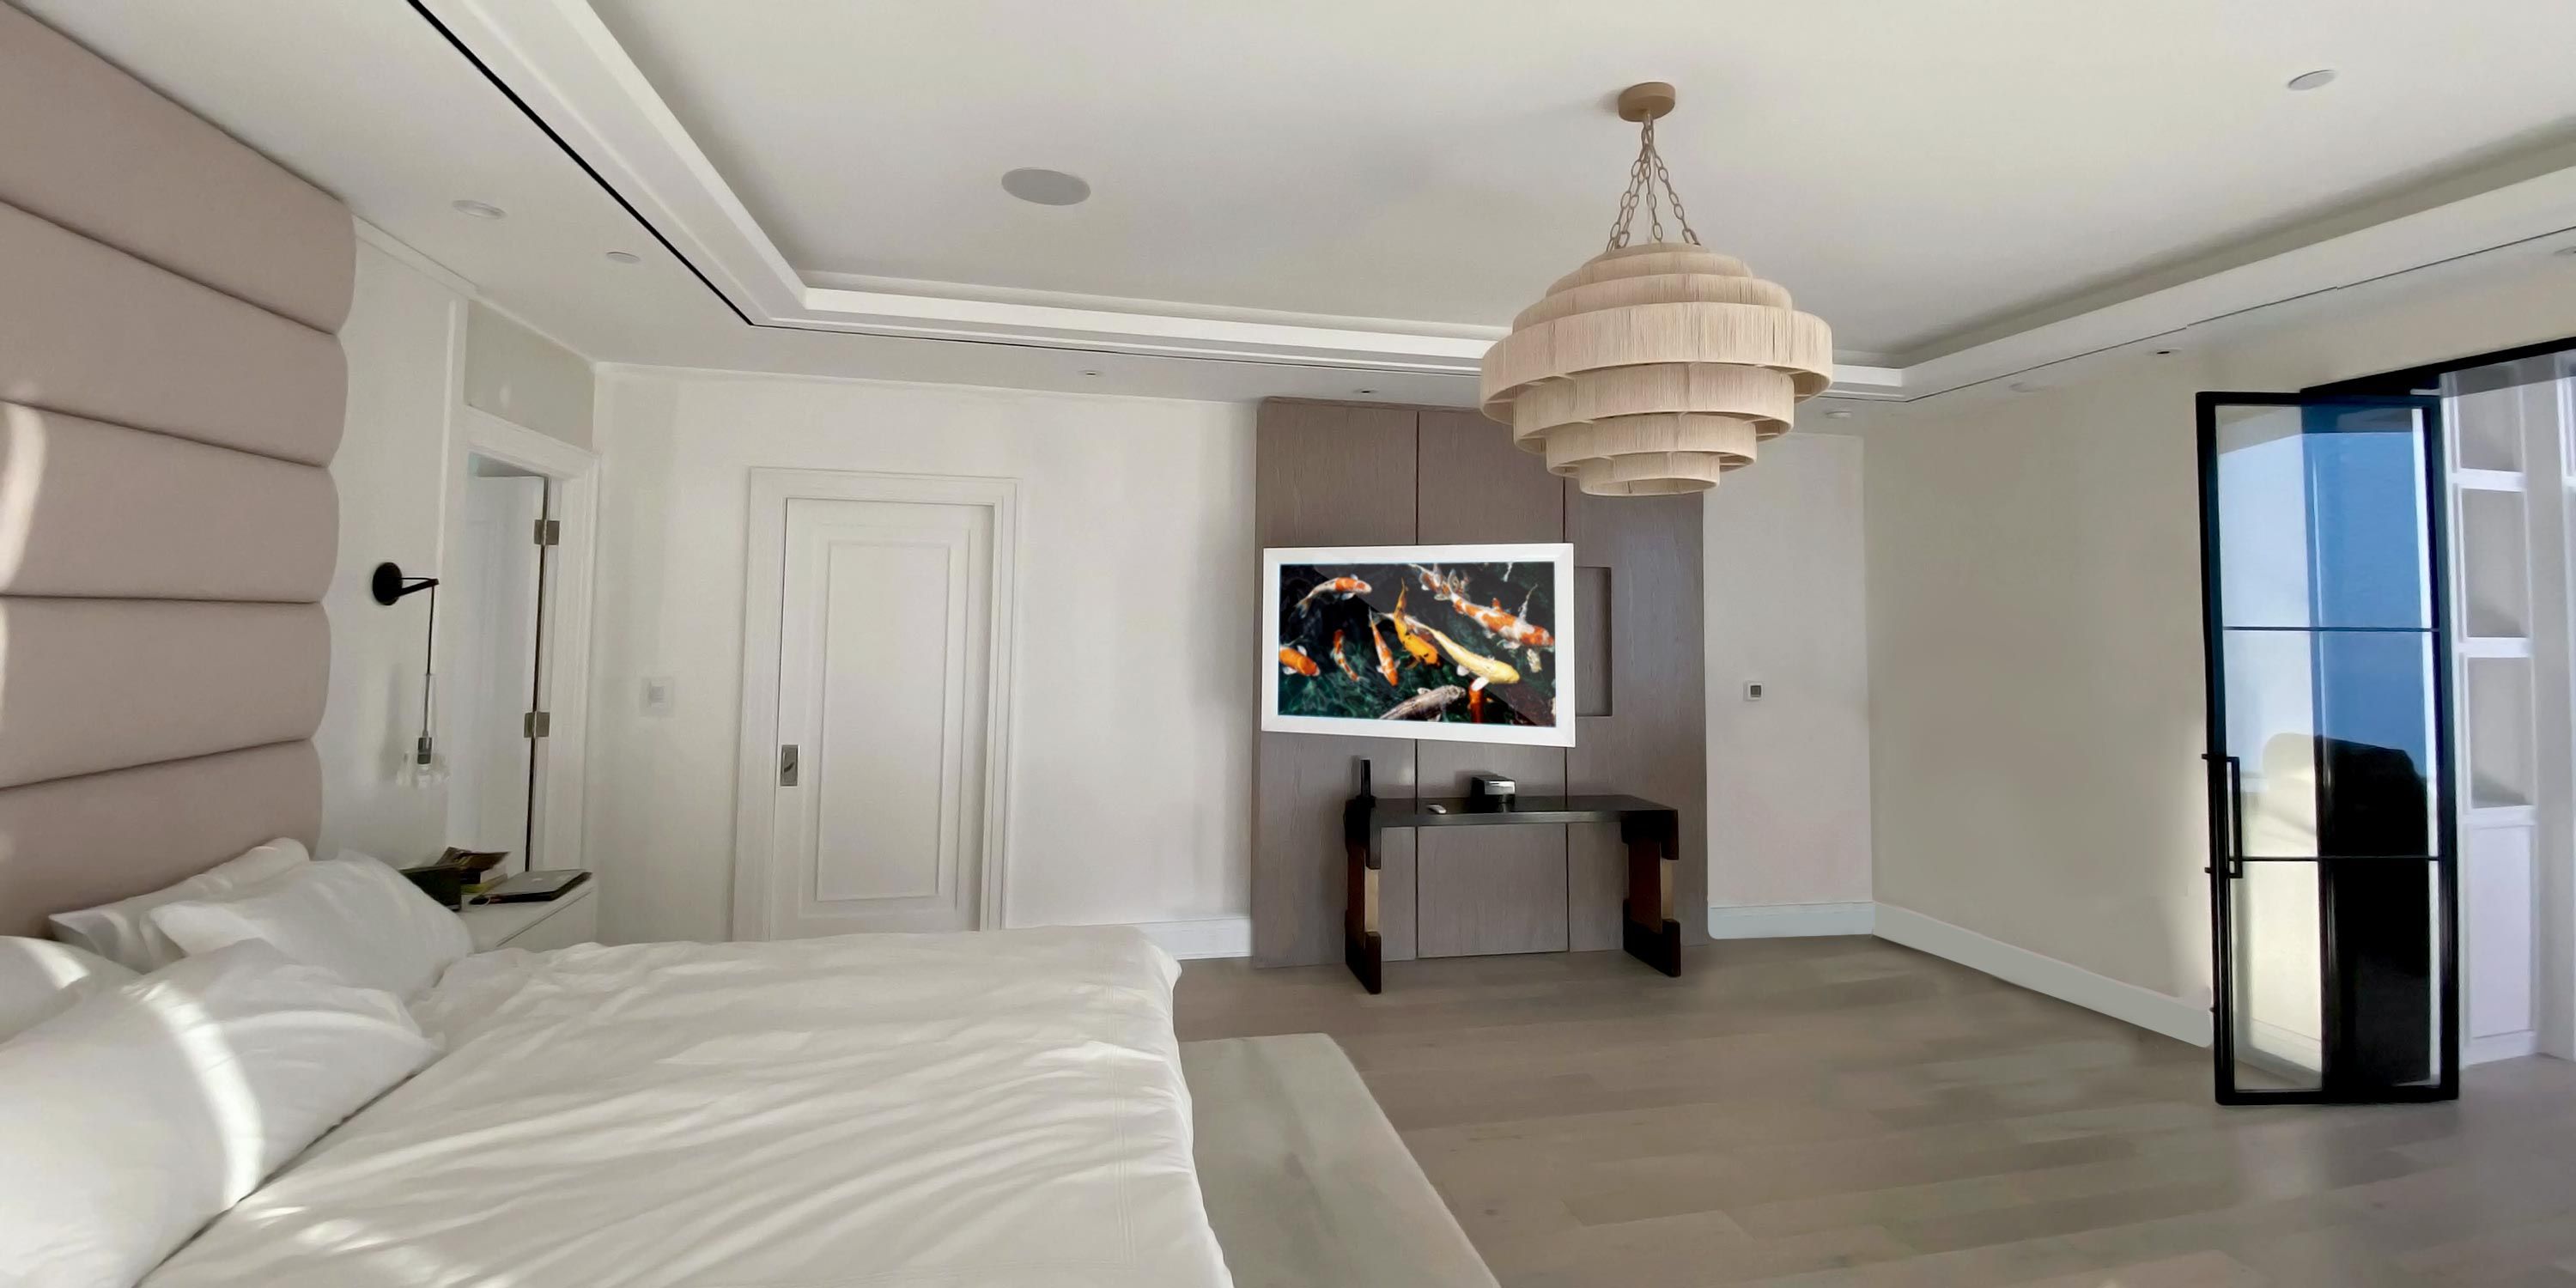 control4 technology in a light bedroom